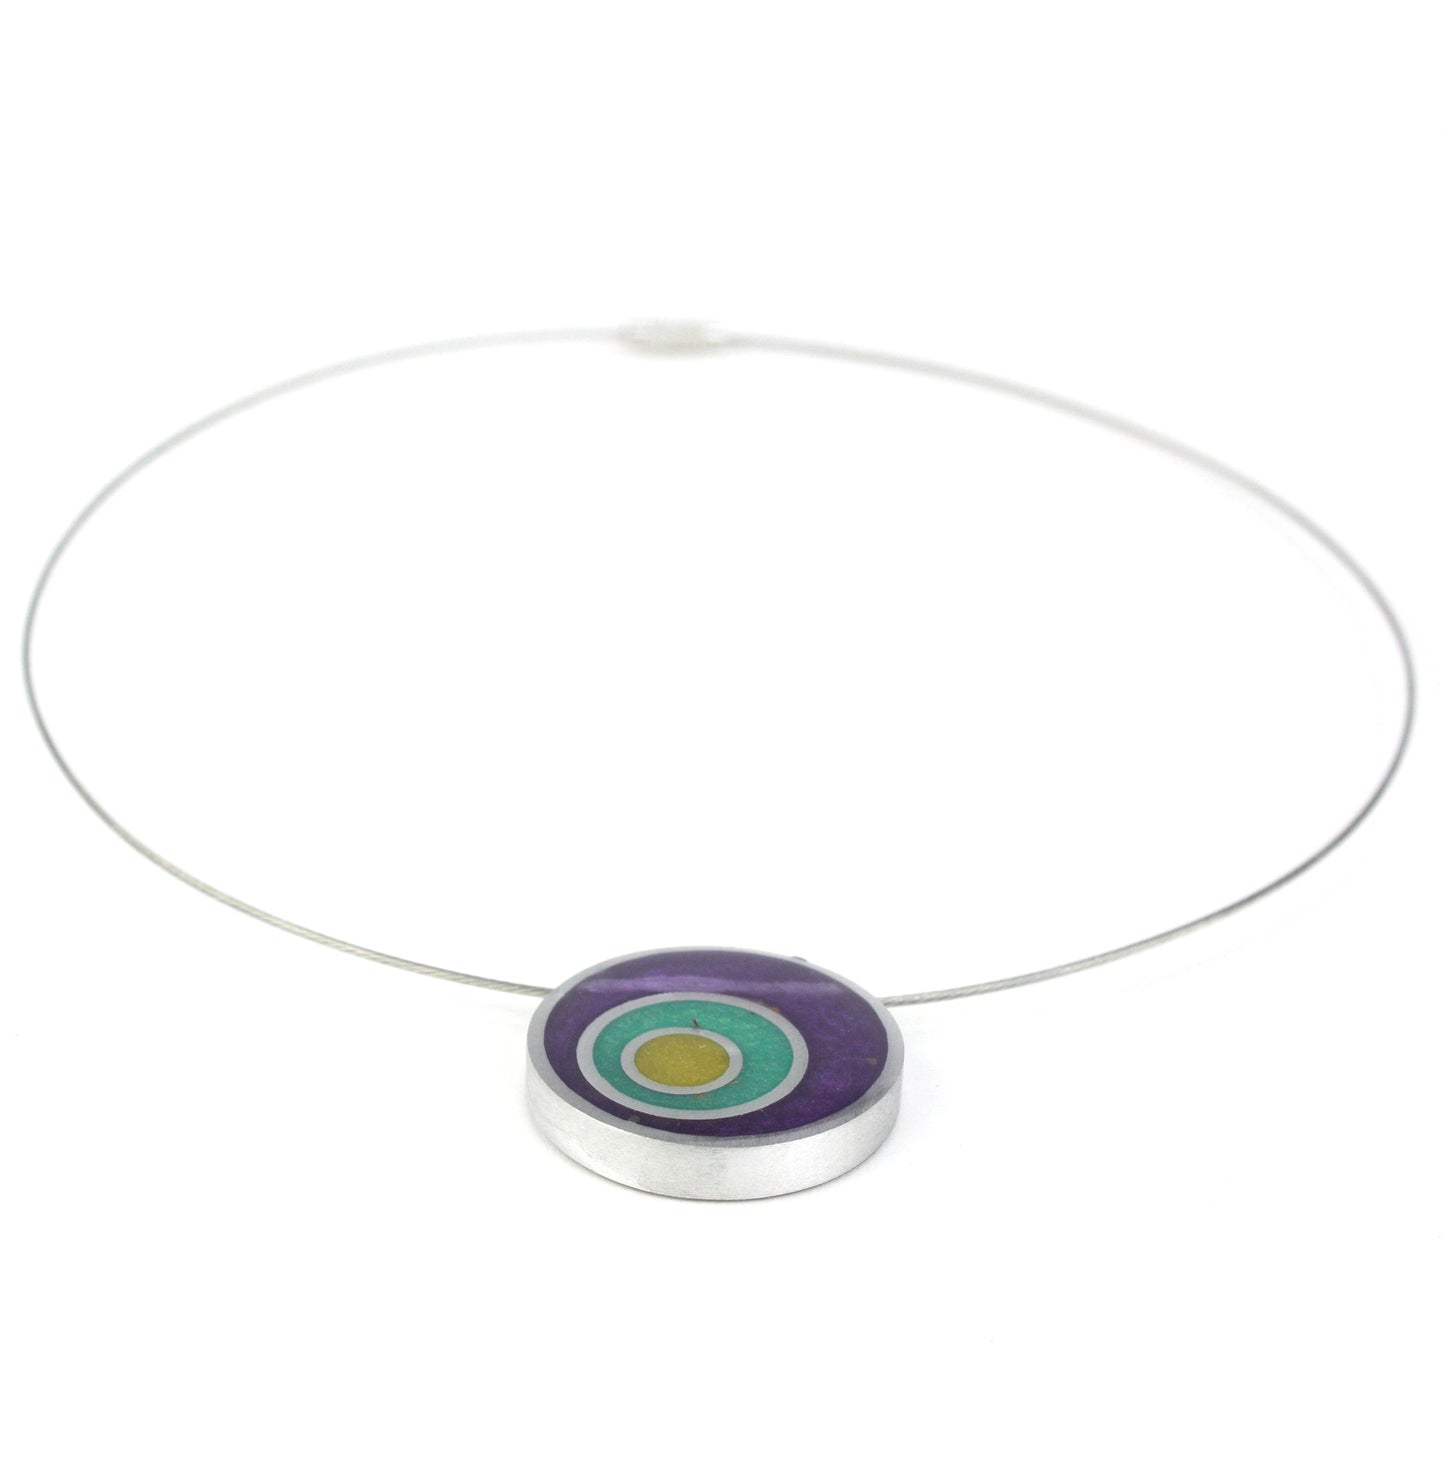 Resinique triple circle necklace - Purple, seafoam and yellow